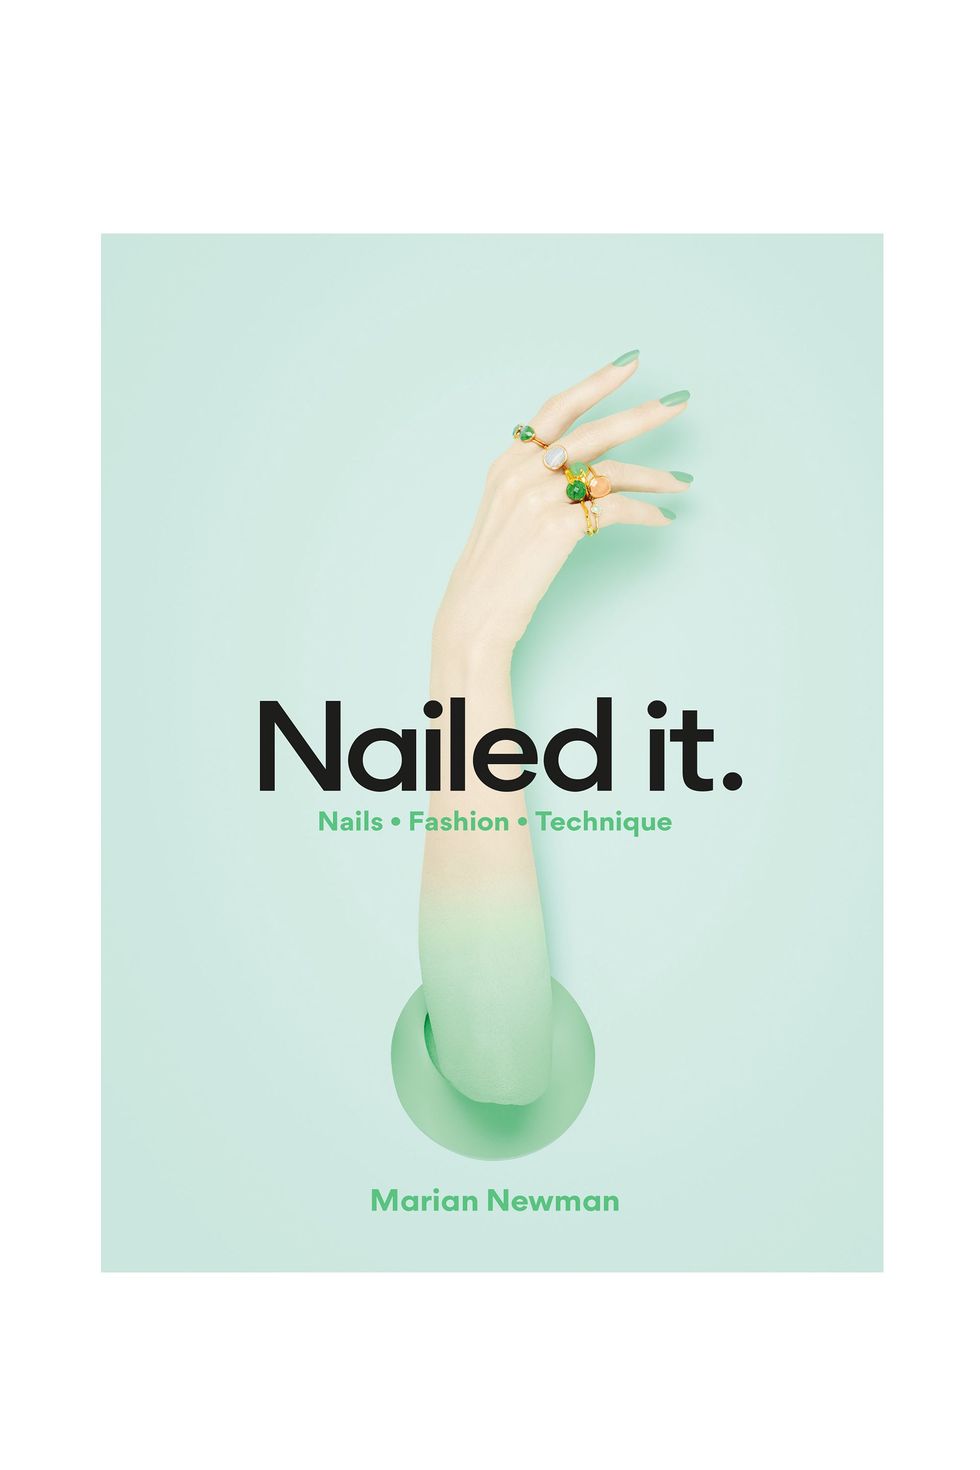 Nailed It by Marian Newman